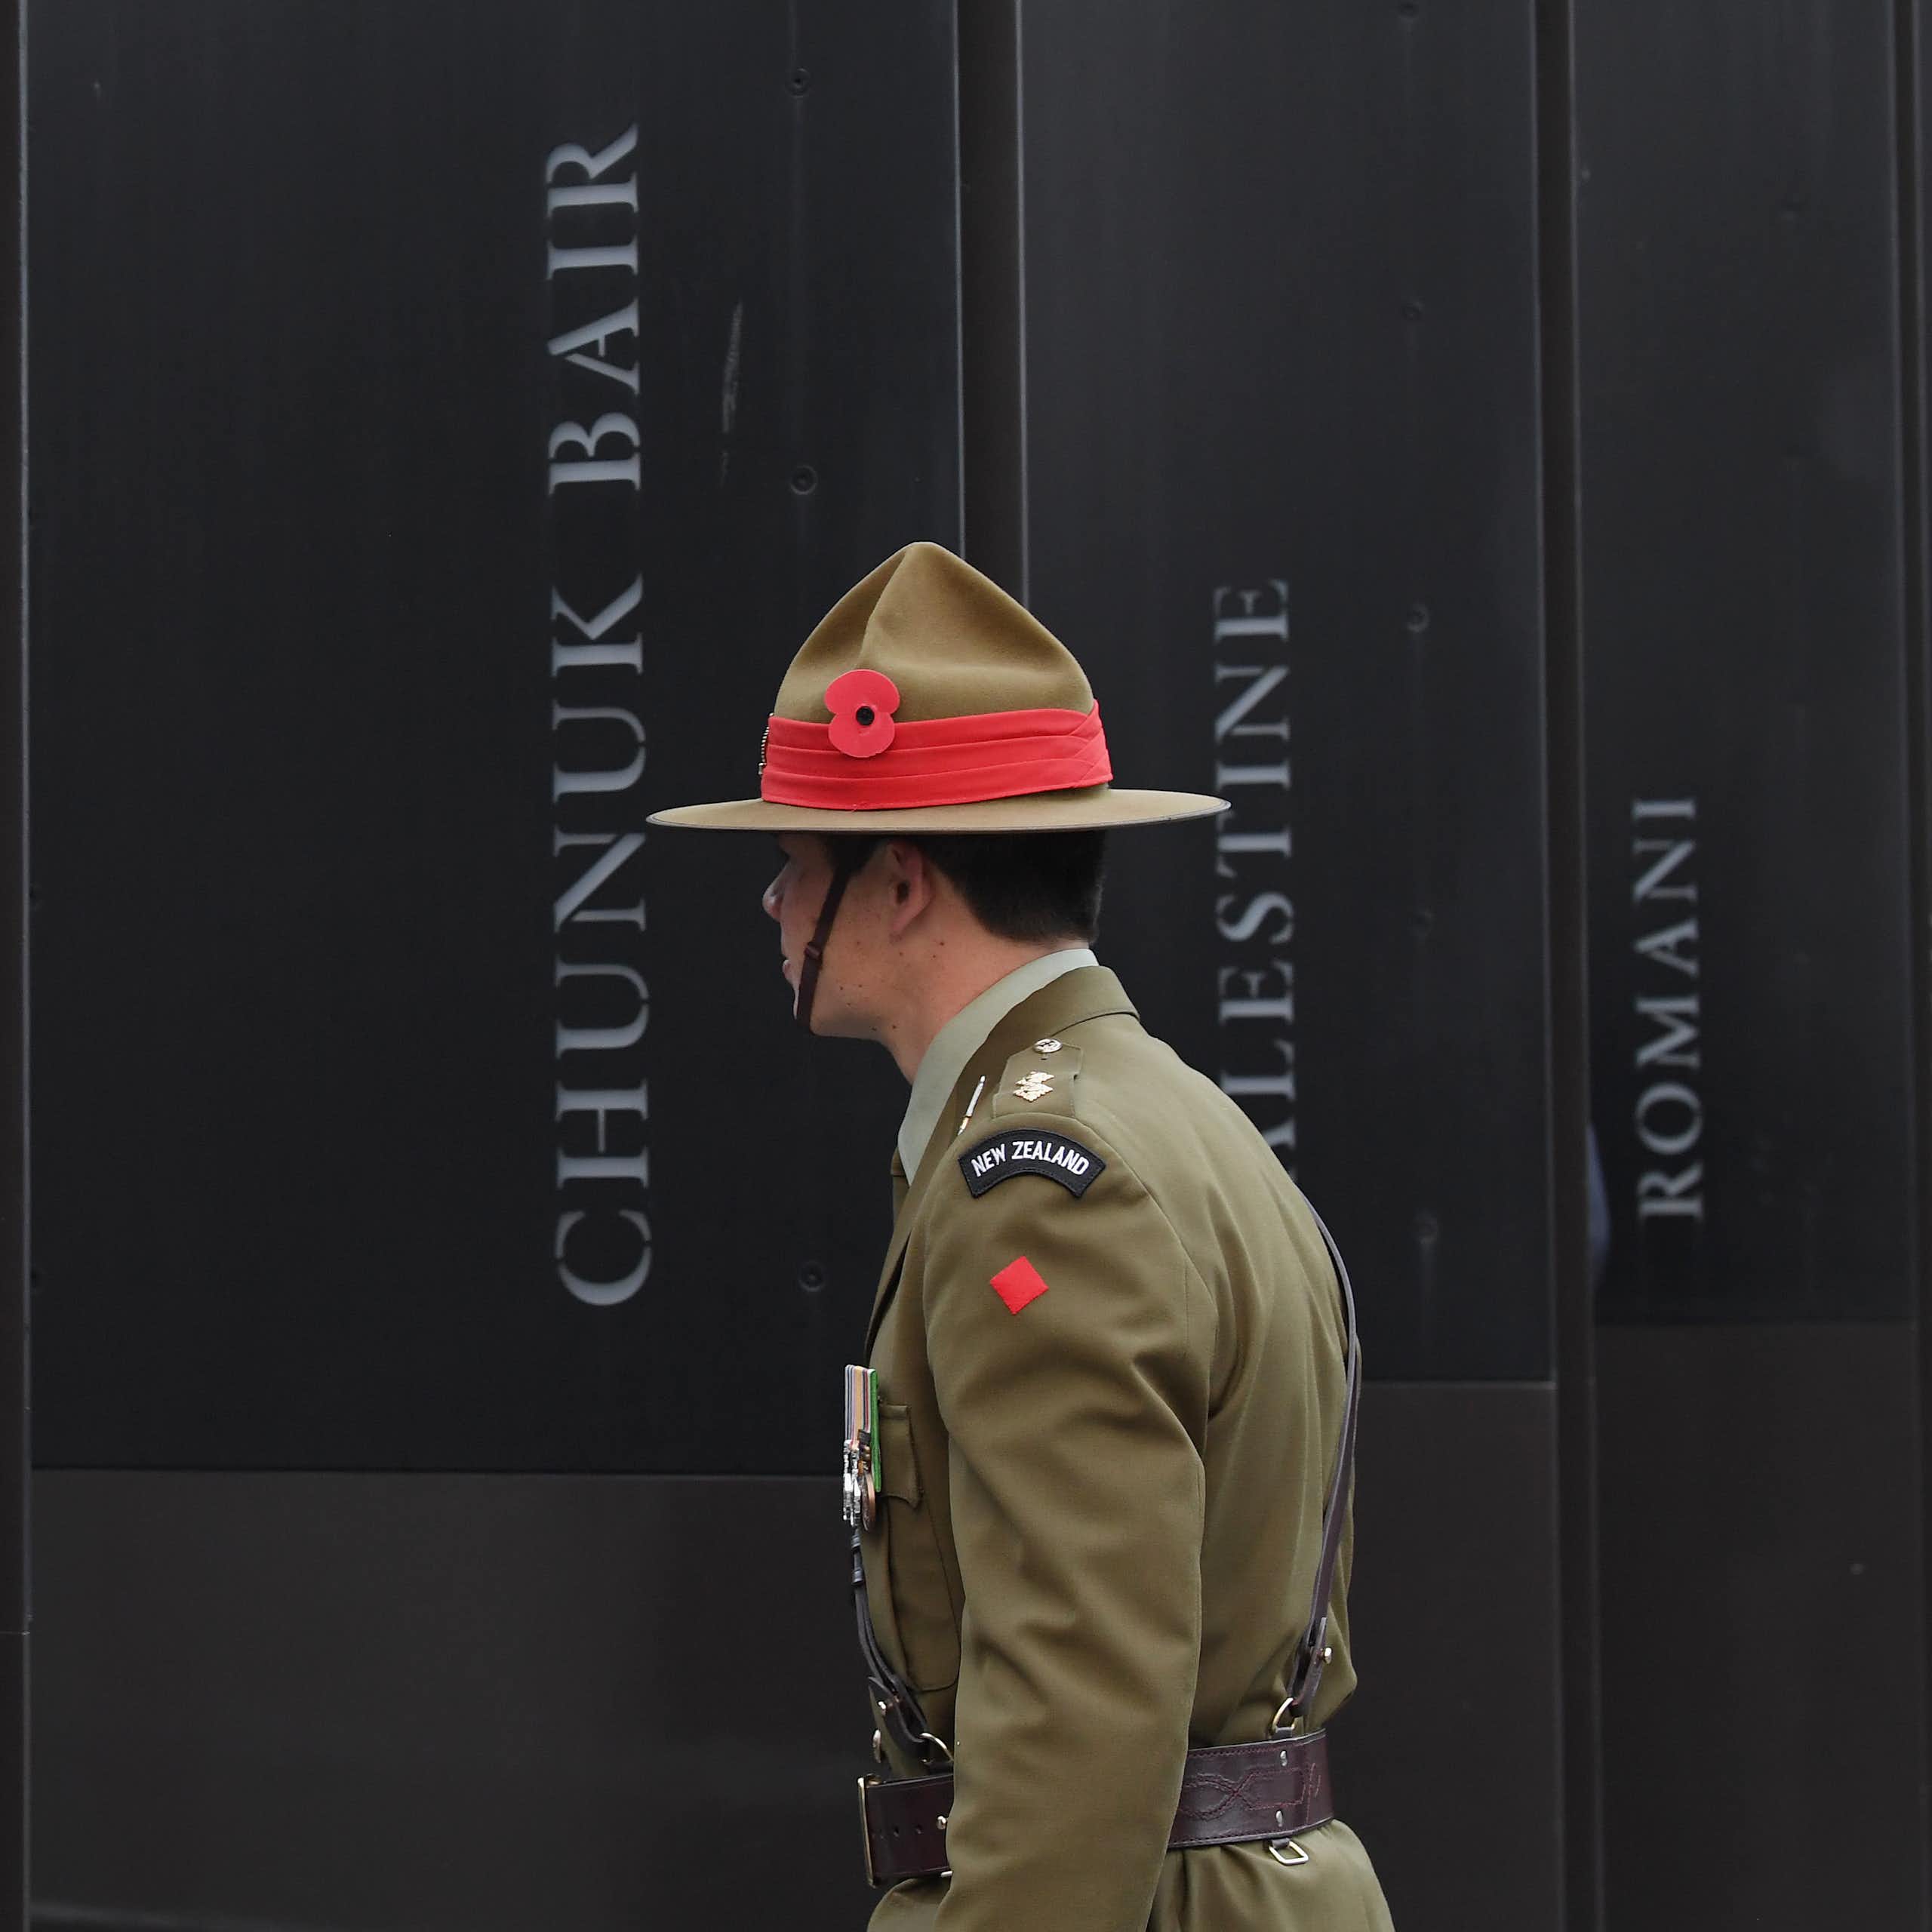 New Zealand soldier in front of World War 1 memorial showing battle names